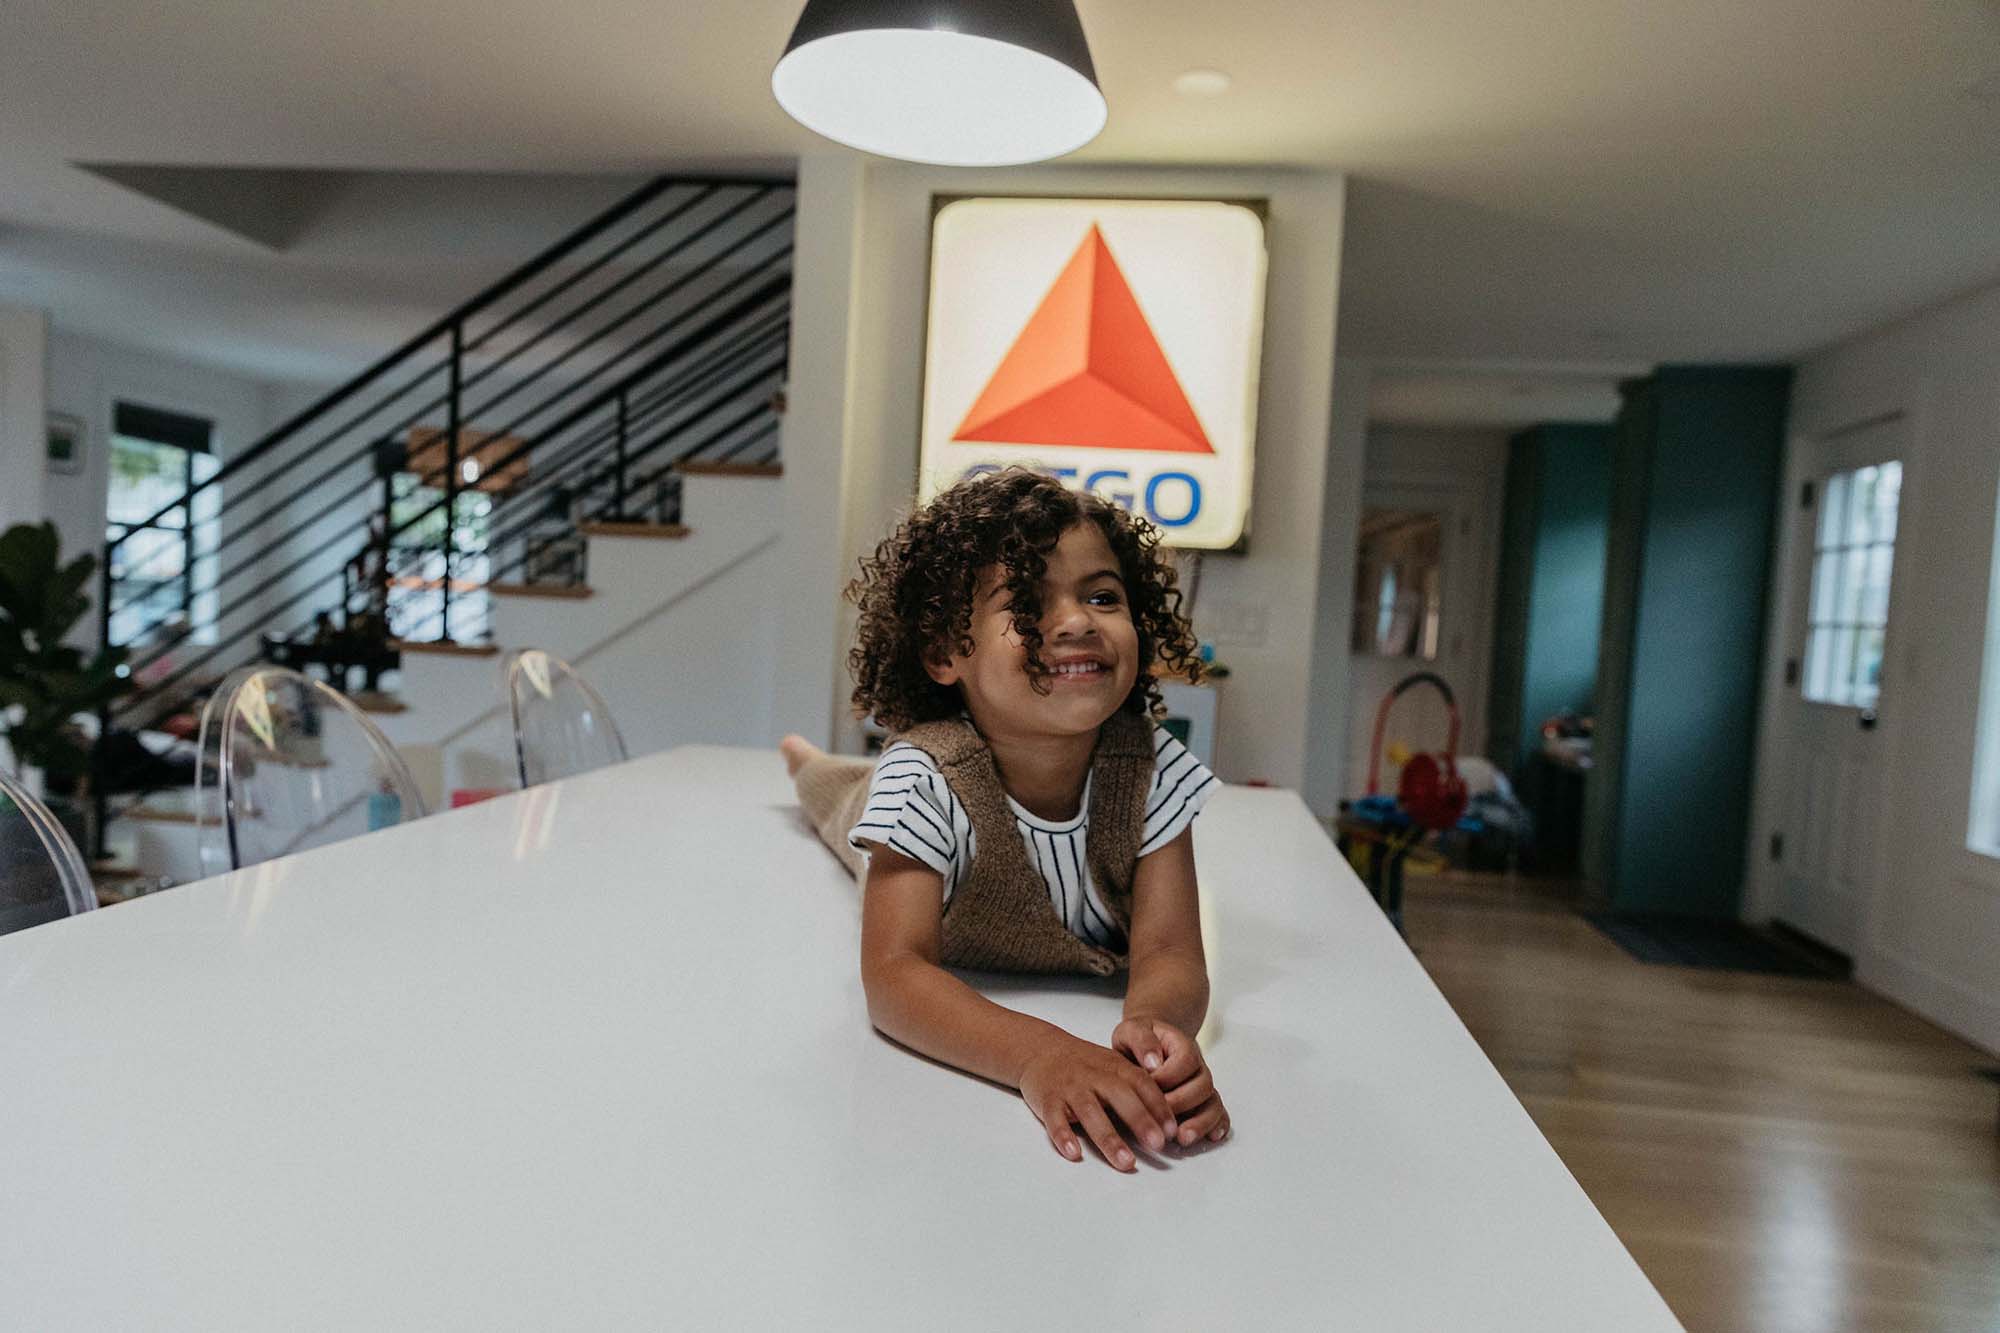 daughter little girl model portraits with boston citgo sign in kitchen.  family photo shoot at home. Boston area NYC family photographer 